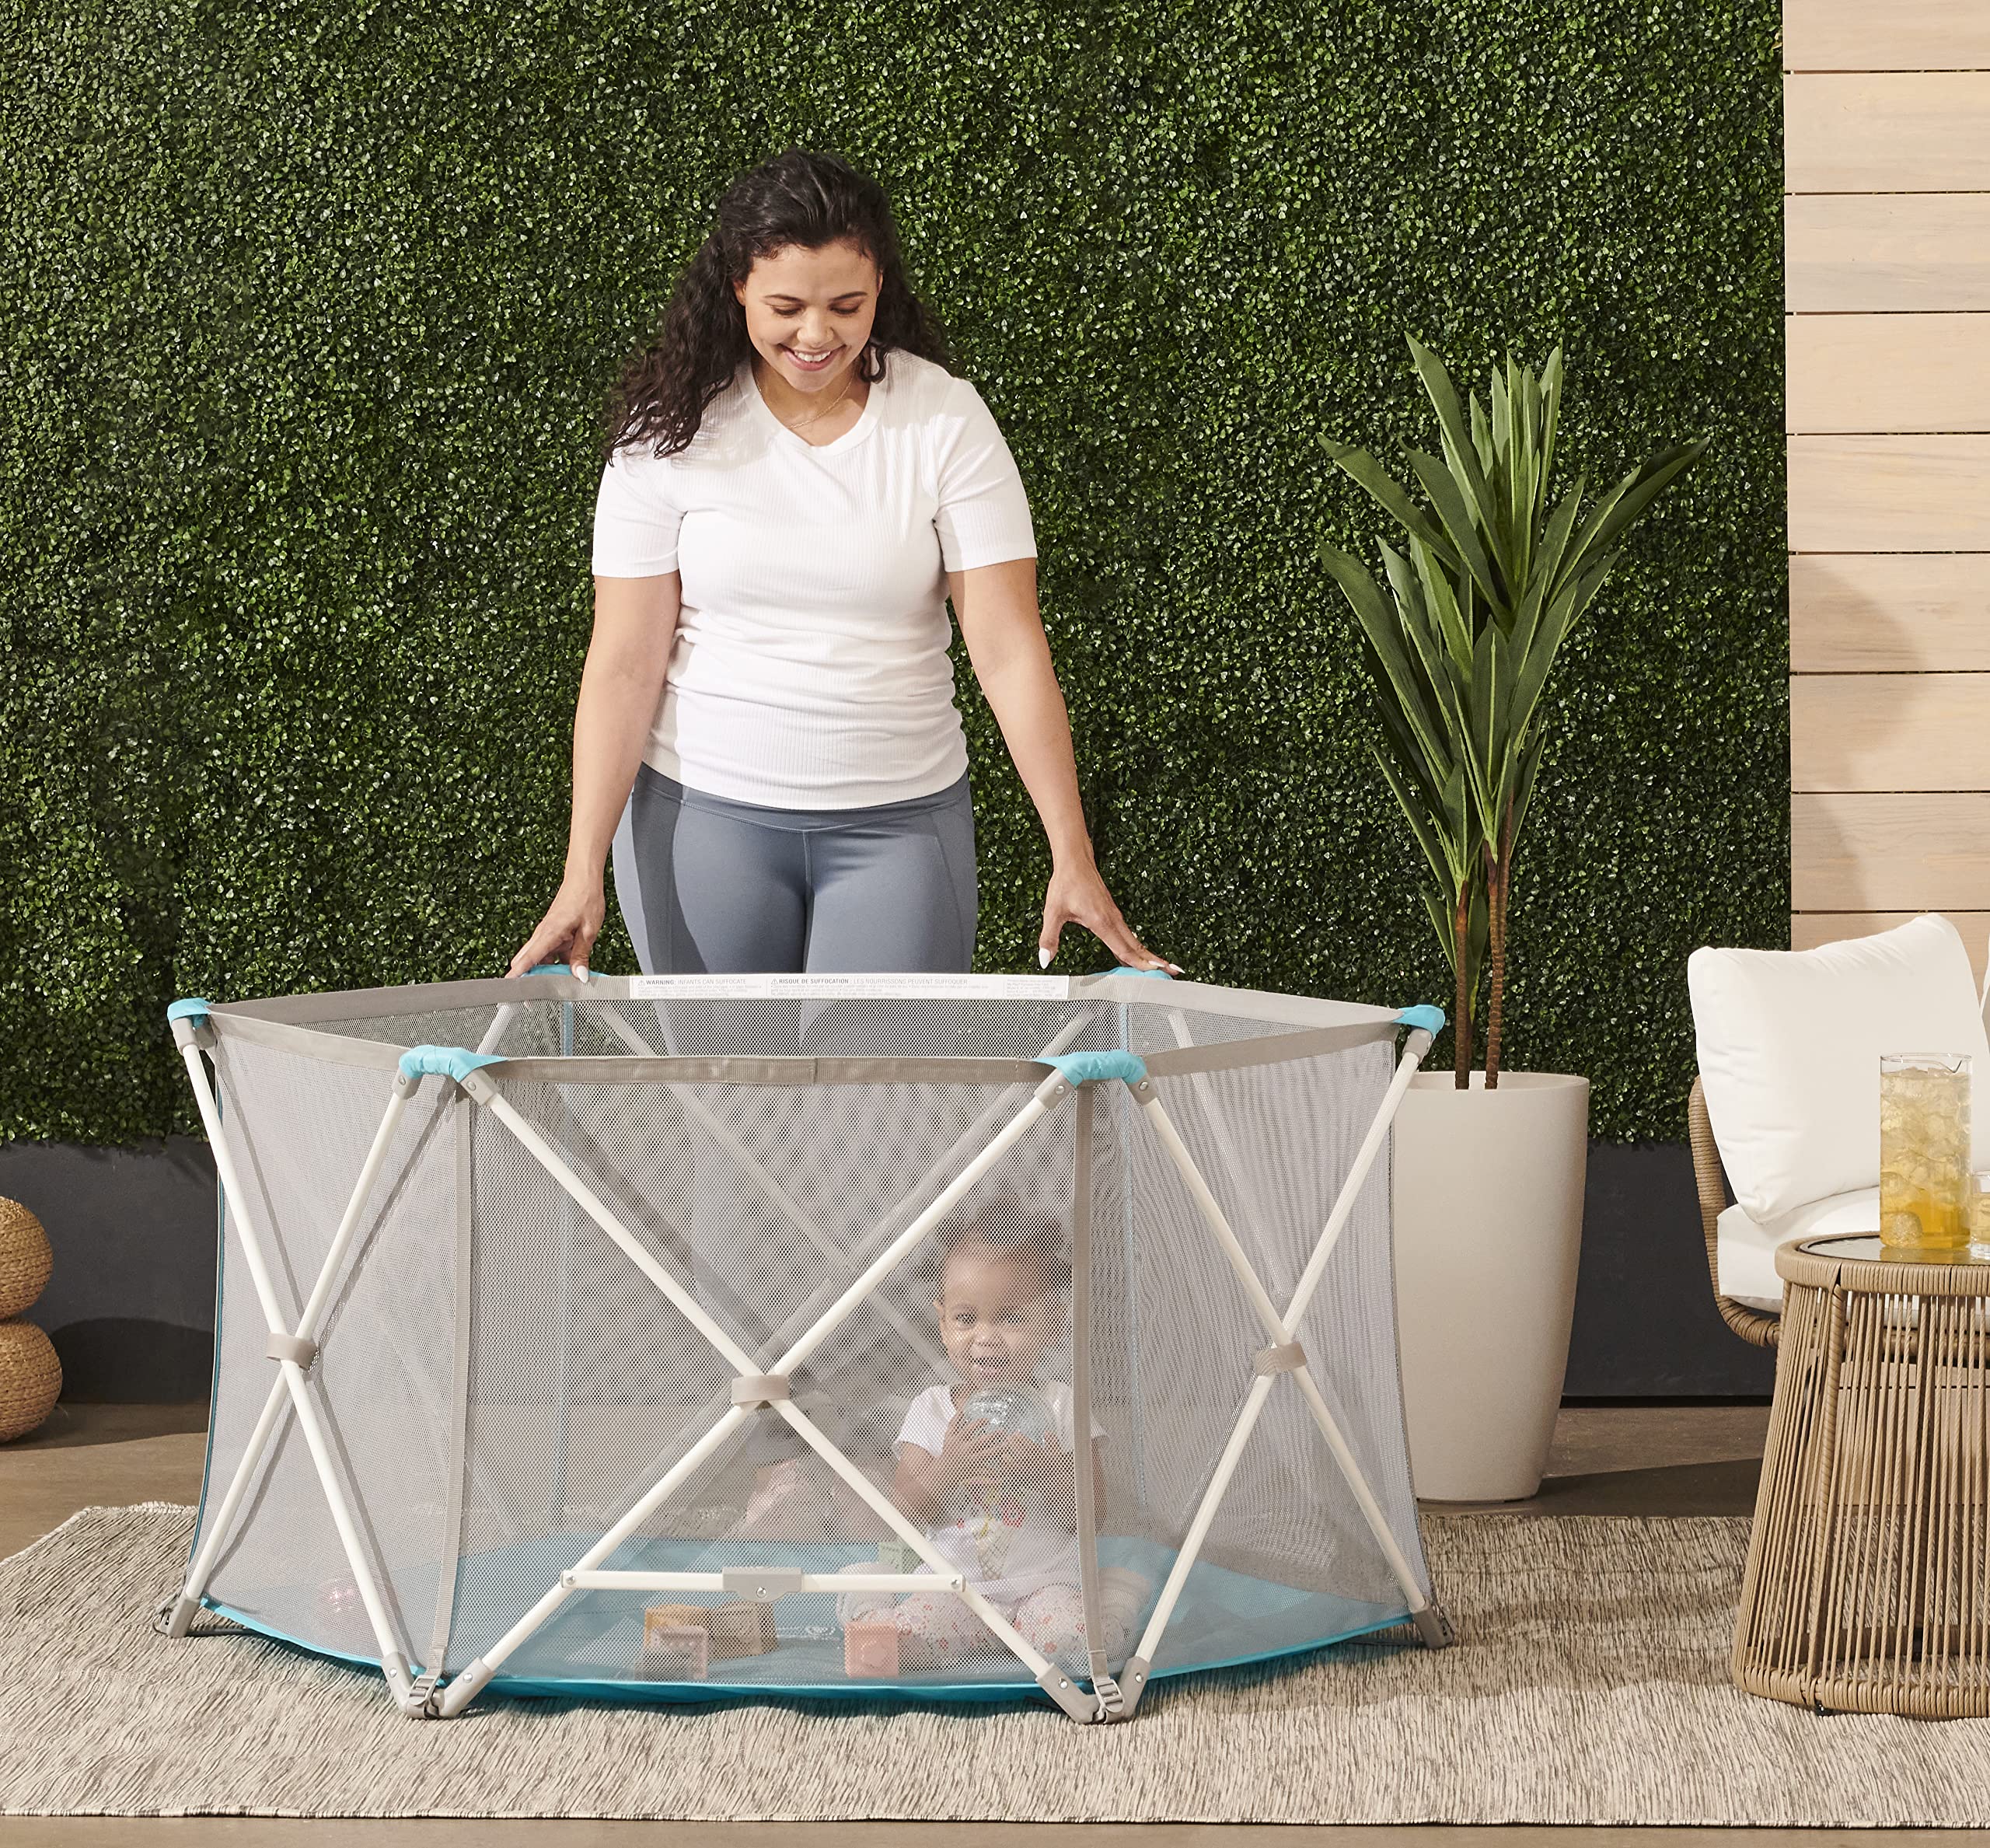 Regalo My Portable Play Yard Indoor and Outdoor, Washable, WhitegrayTeal, 6-Panel